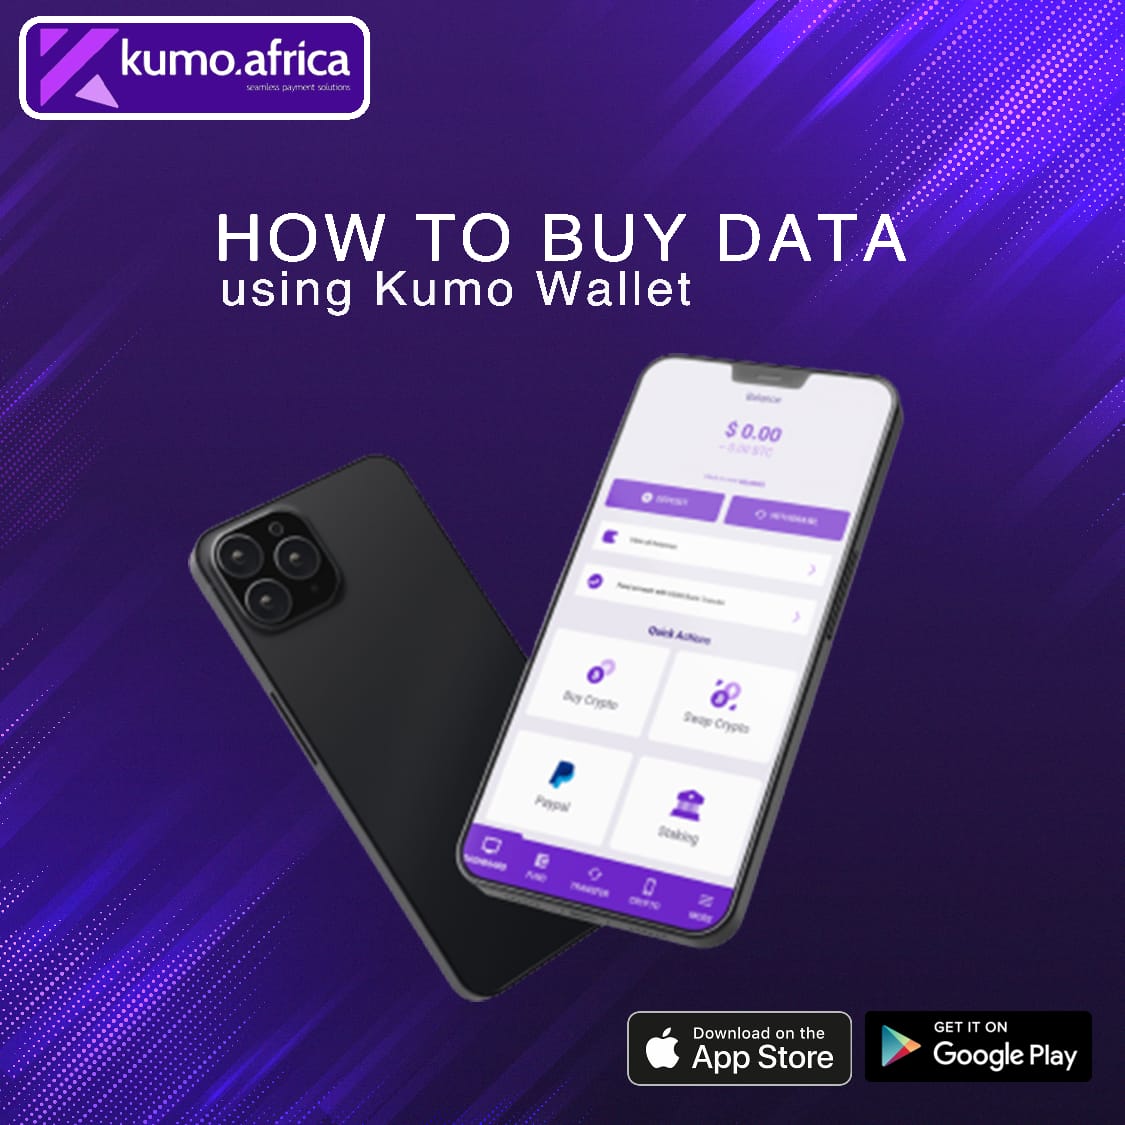 how to buy data on Kumo wallet